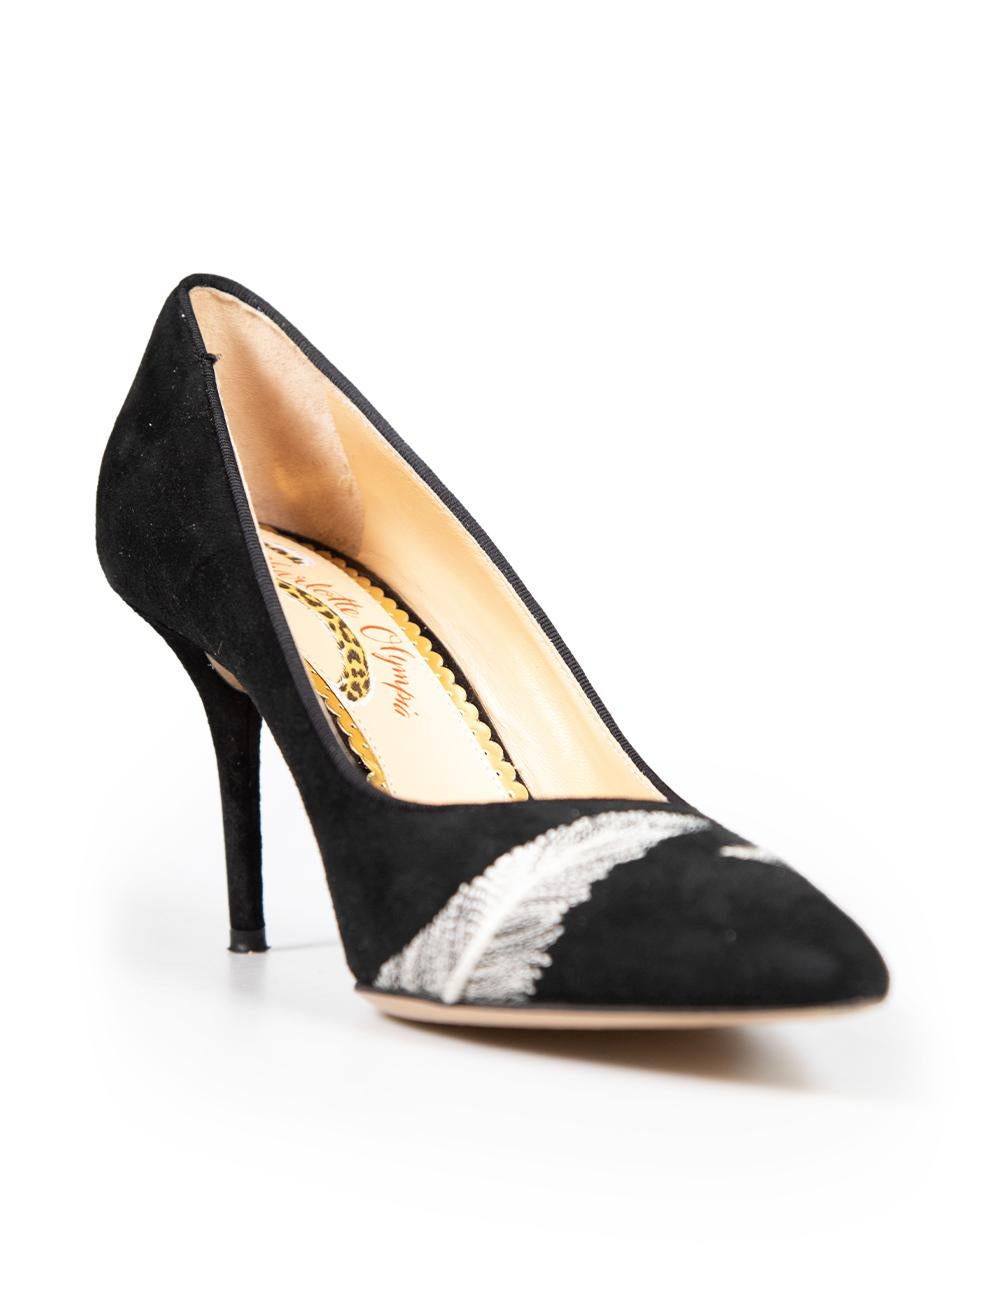 CONDITION is Very good. Minimal wear to pumps is evident. Small abrasions to both heels and loose thread on the upper right side of the left shoe on this used Charlotte Olympia designer resale item. This item comes with an original box.
 
 
 
